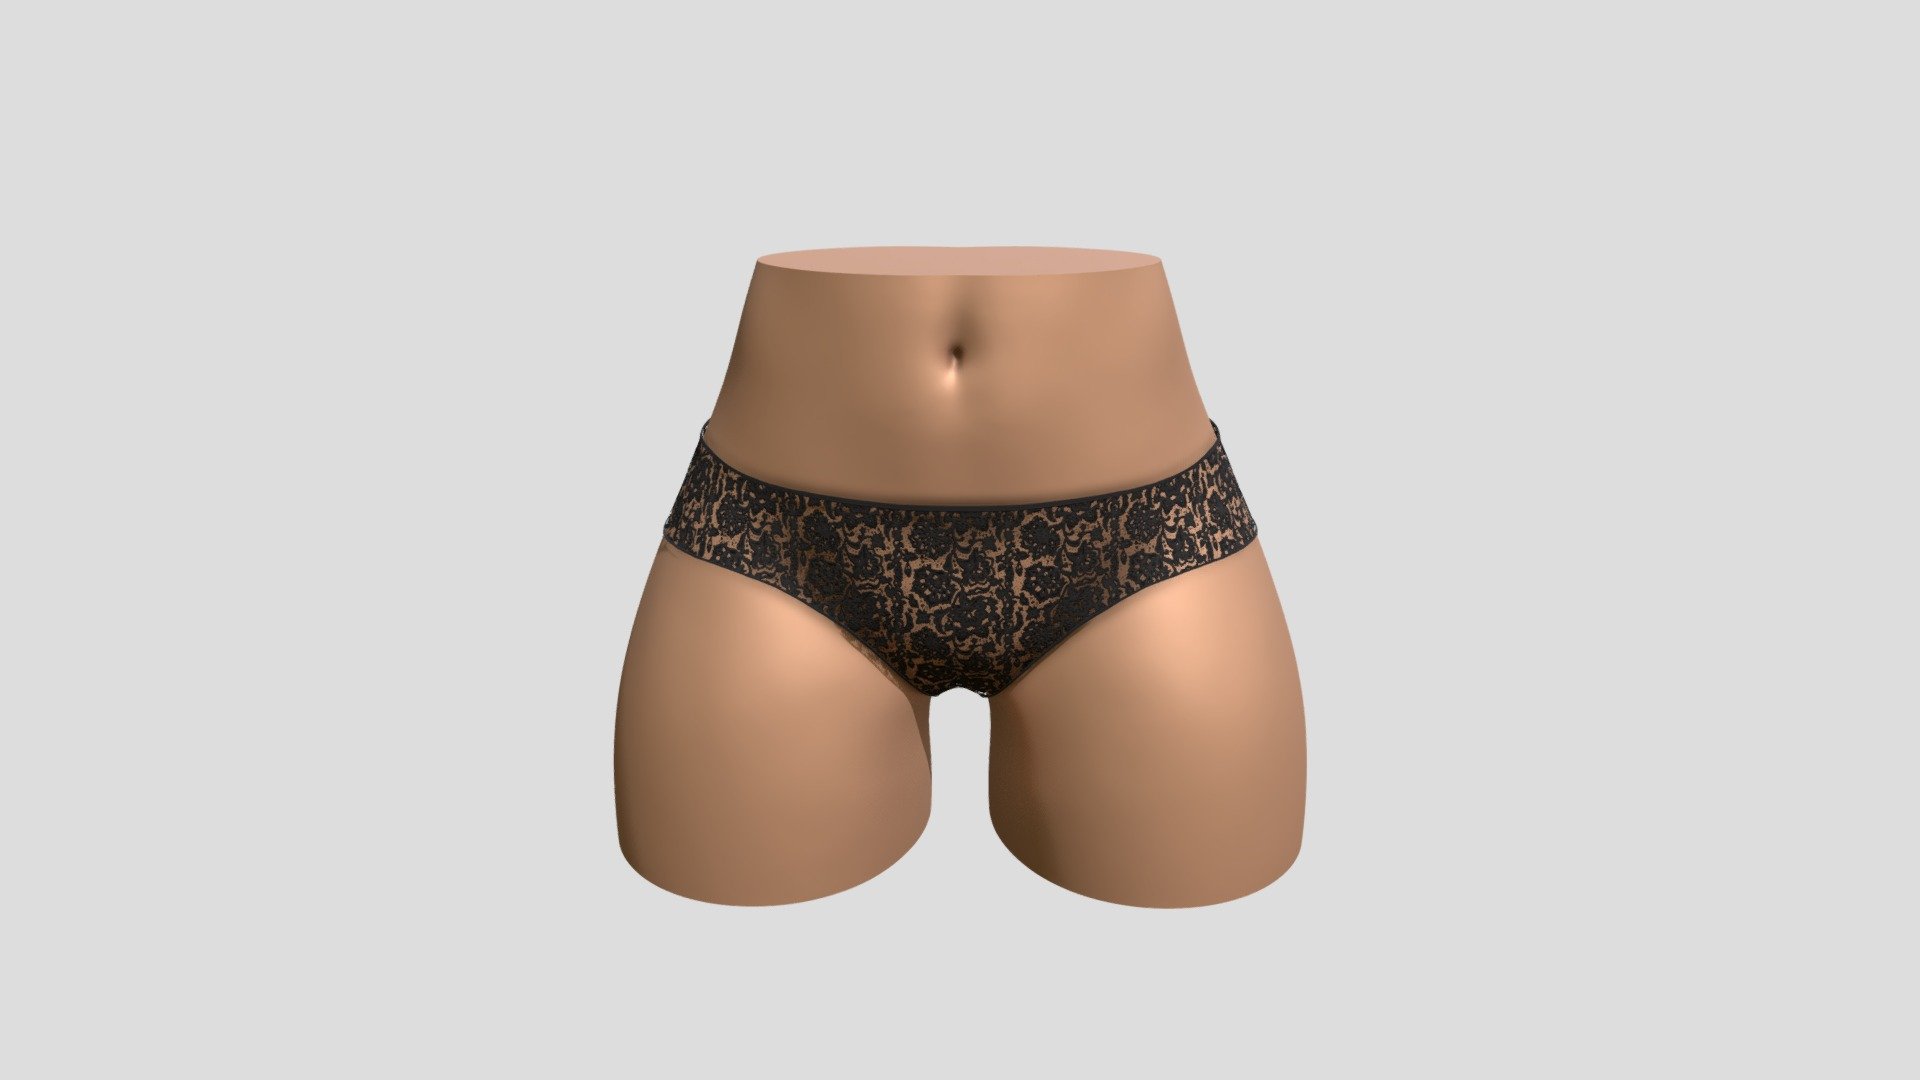 Still learning, let me know how I did - Flower Lace Lingerie - 3D model by cptnbubbles69 3d model